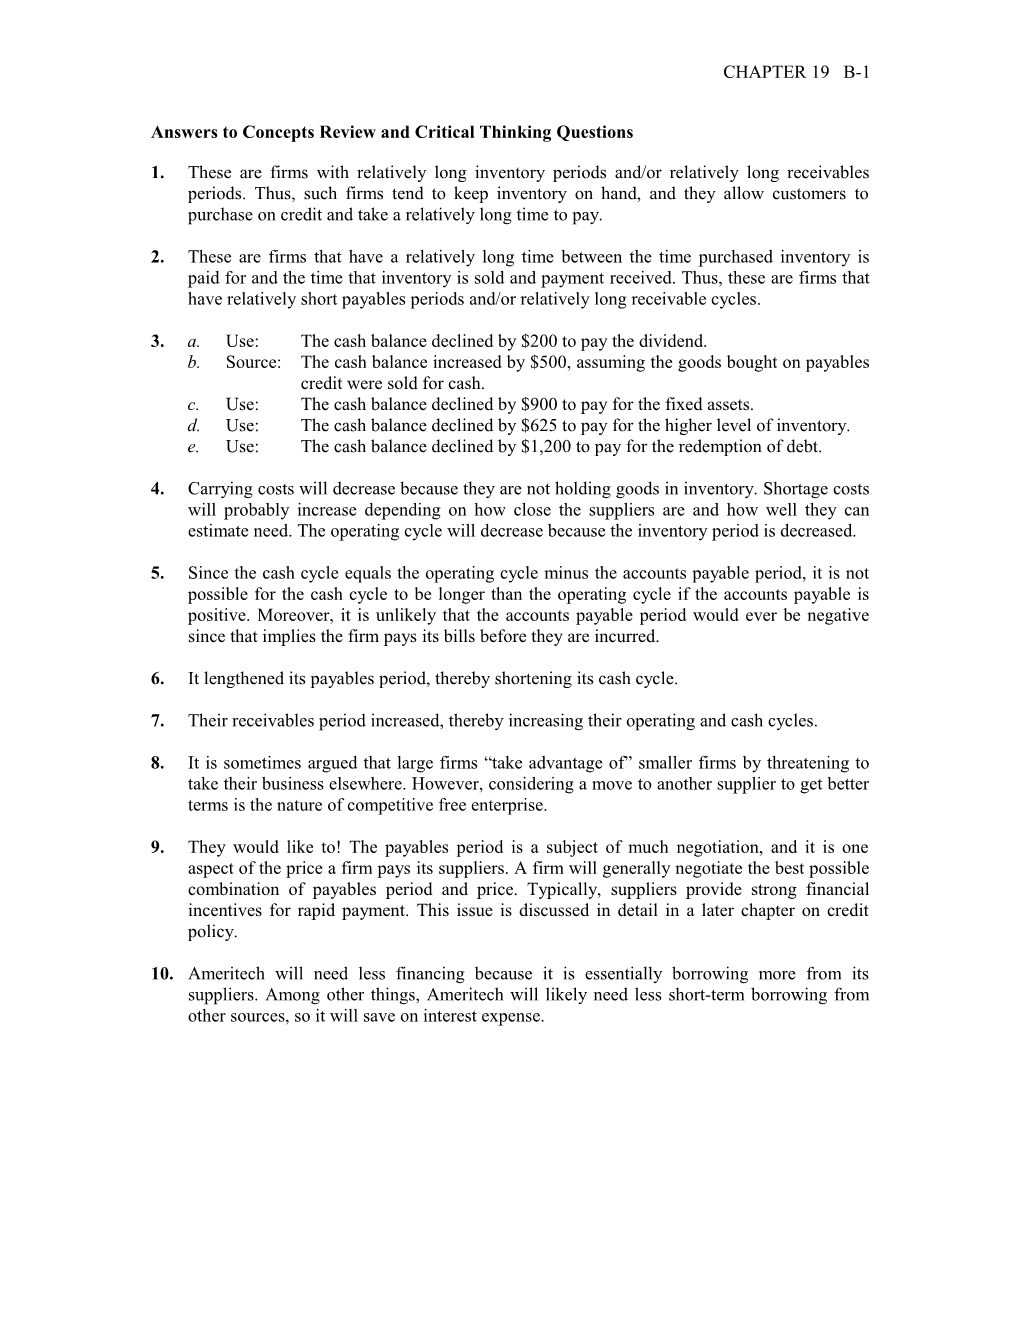 Answers to Concepts Review and Critical Thinking Questions s8